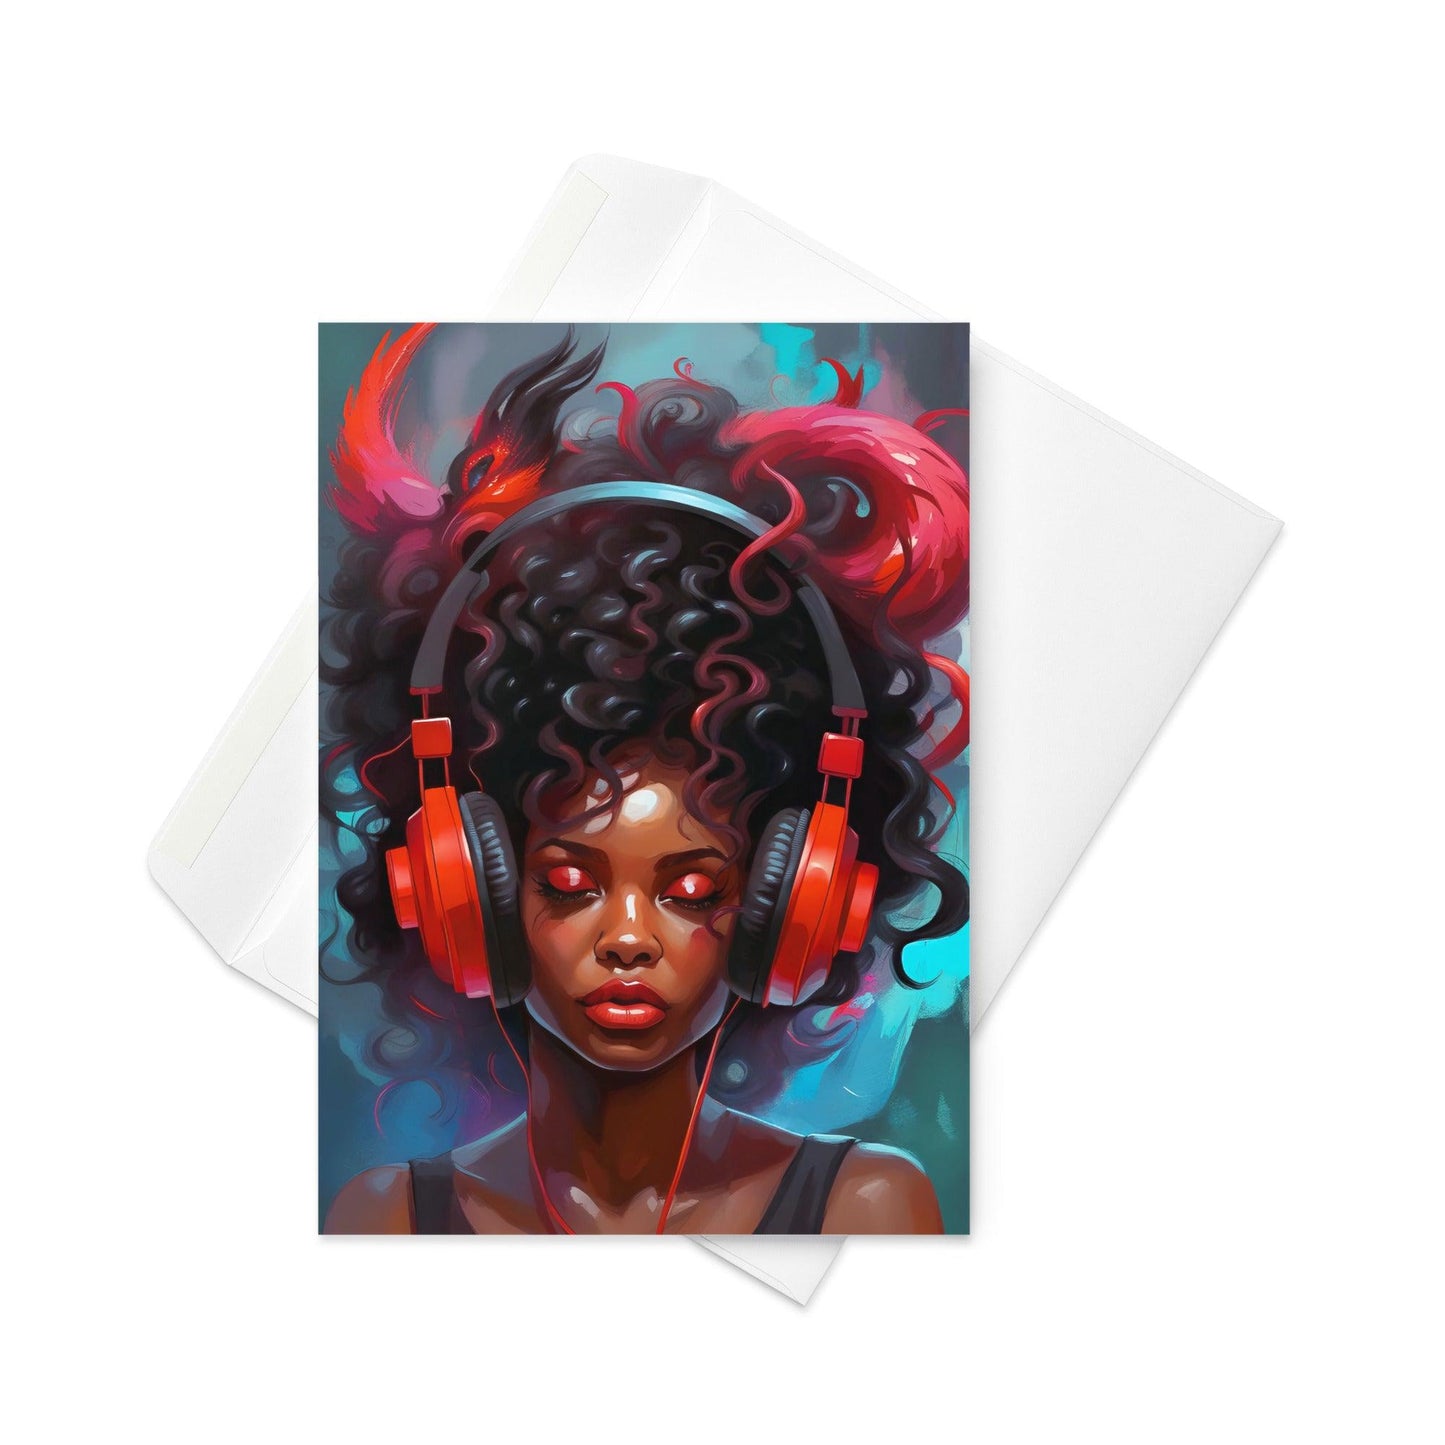 Medusa And Her Music - Note Card - iSAW Company